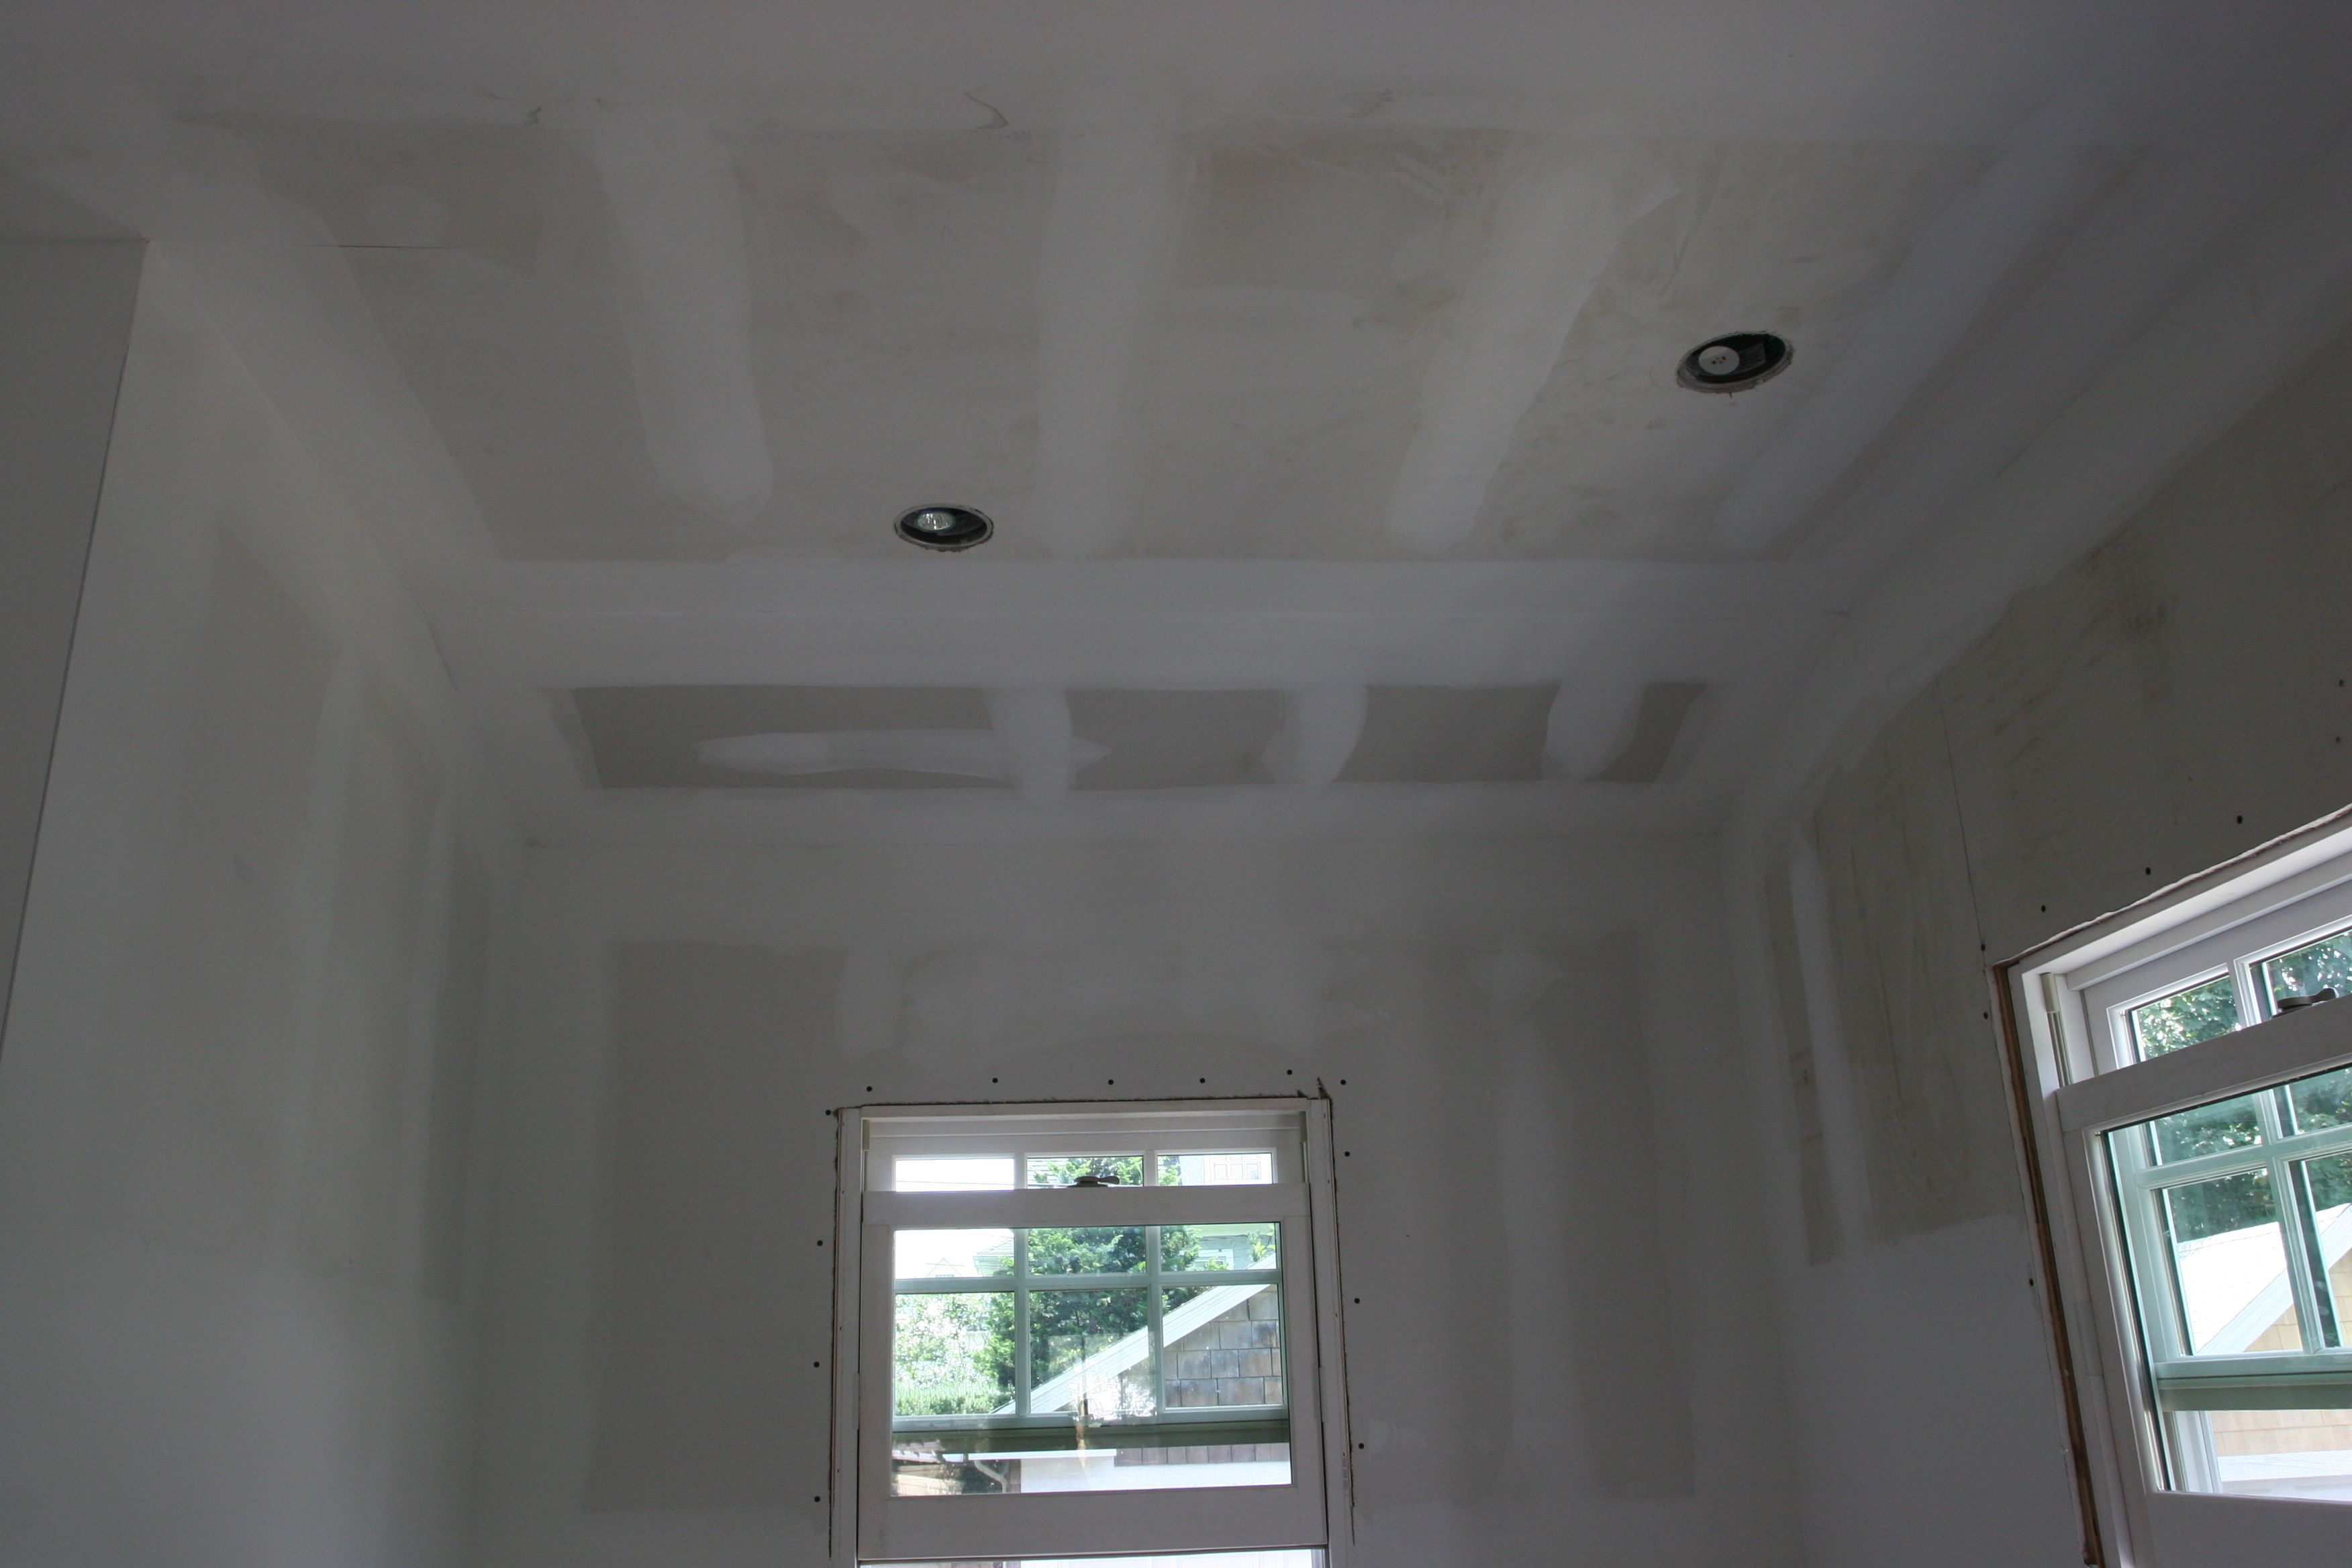 Saturday: ceiling above the baking nook.